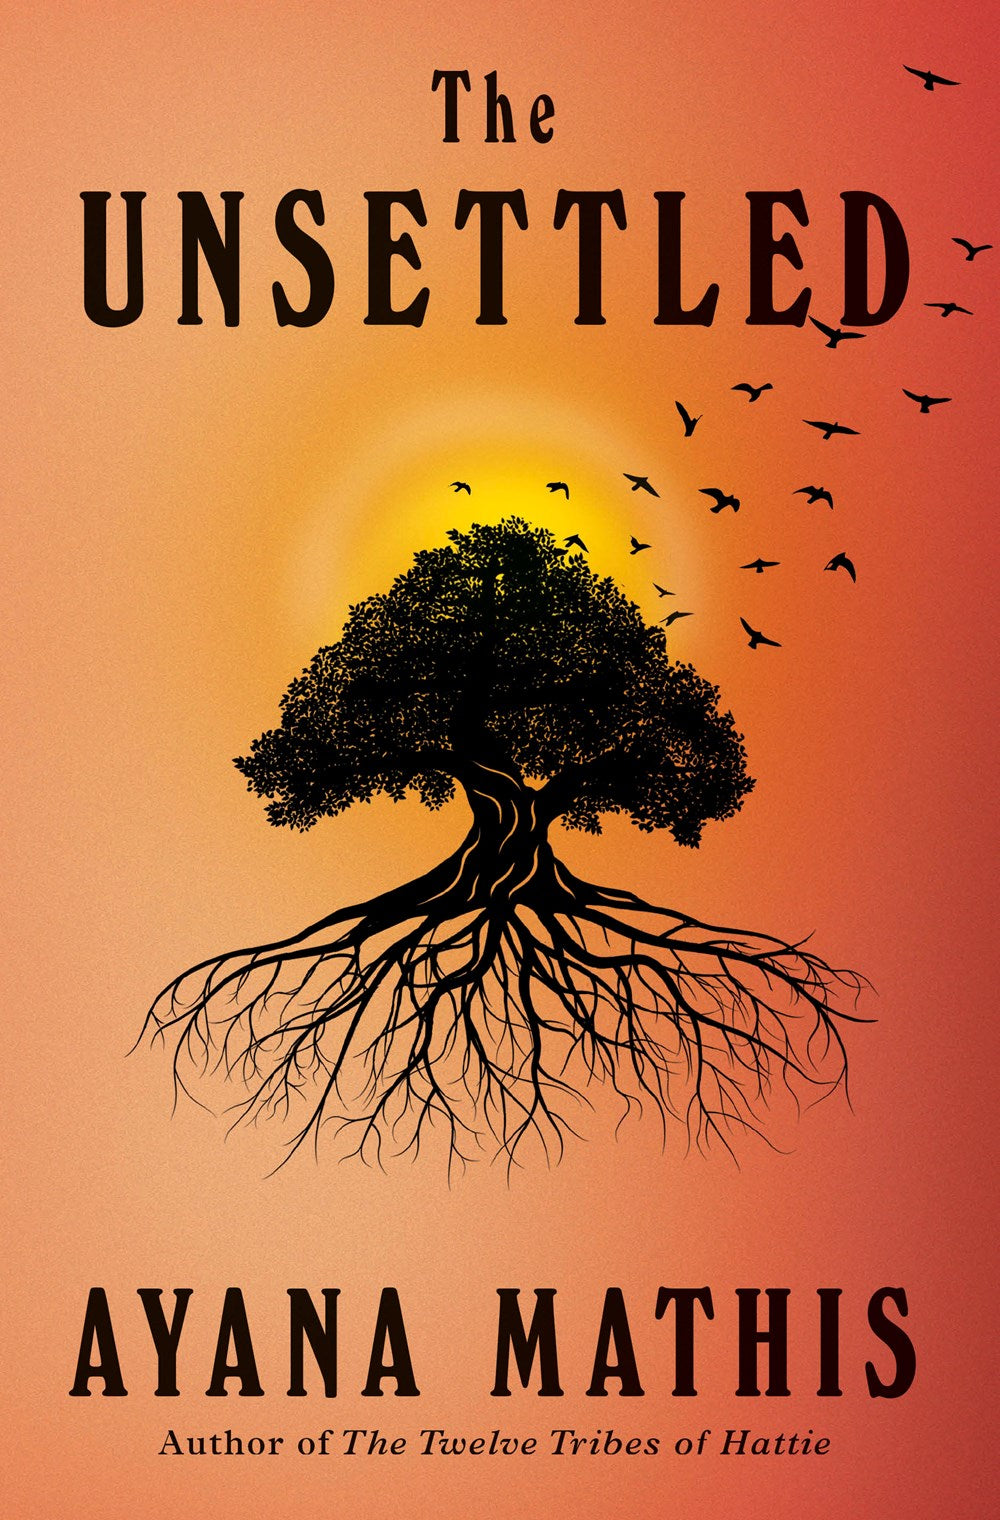 The Unsettled by Ayana Mathis (Hardcover) (PREORDER)